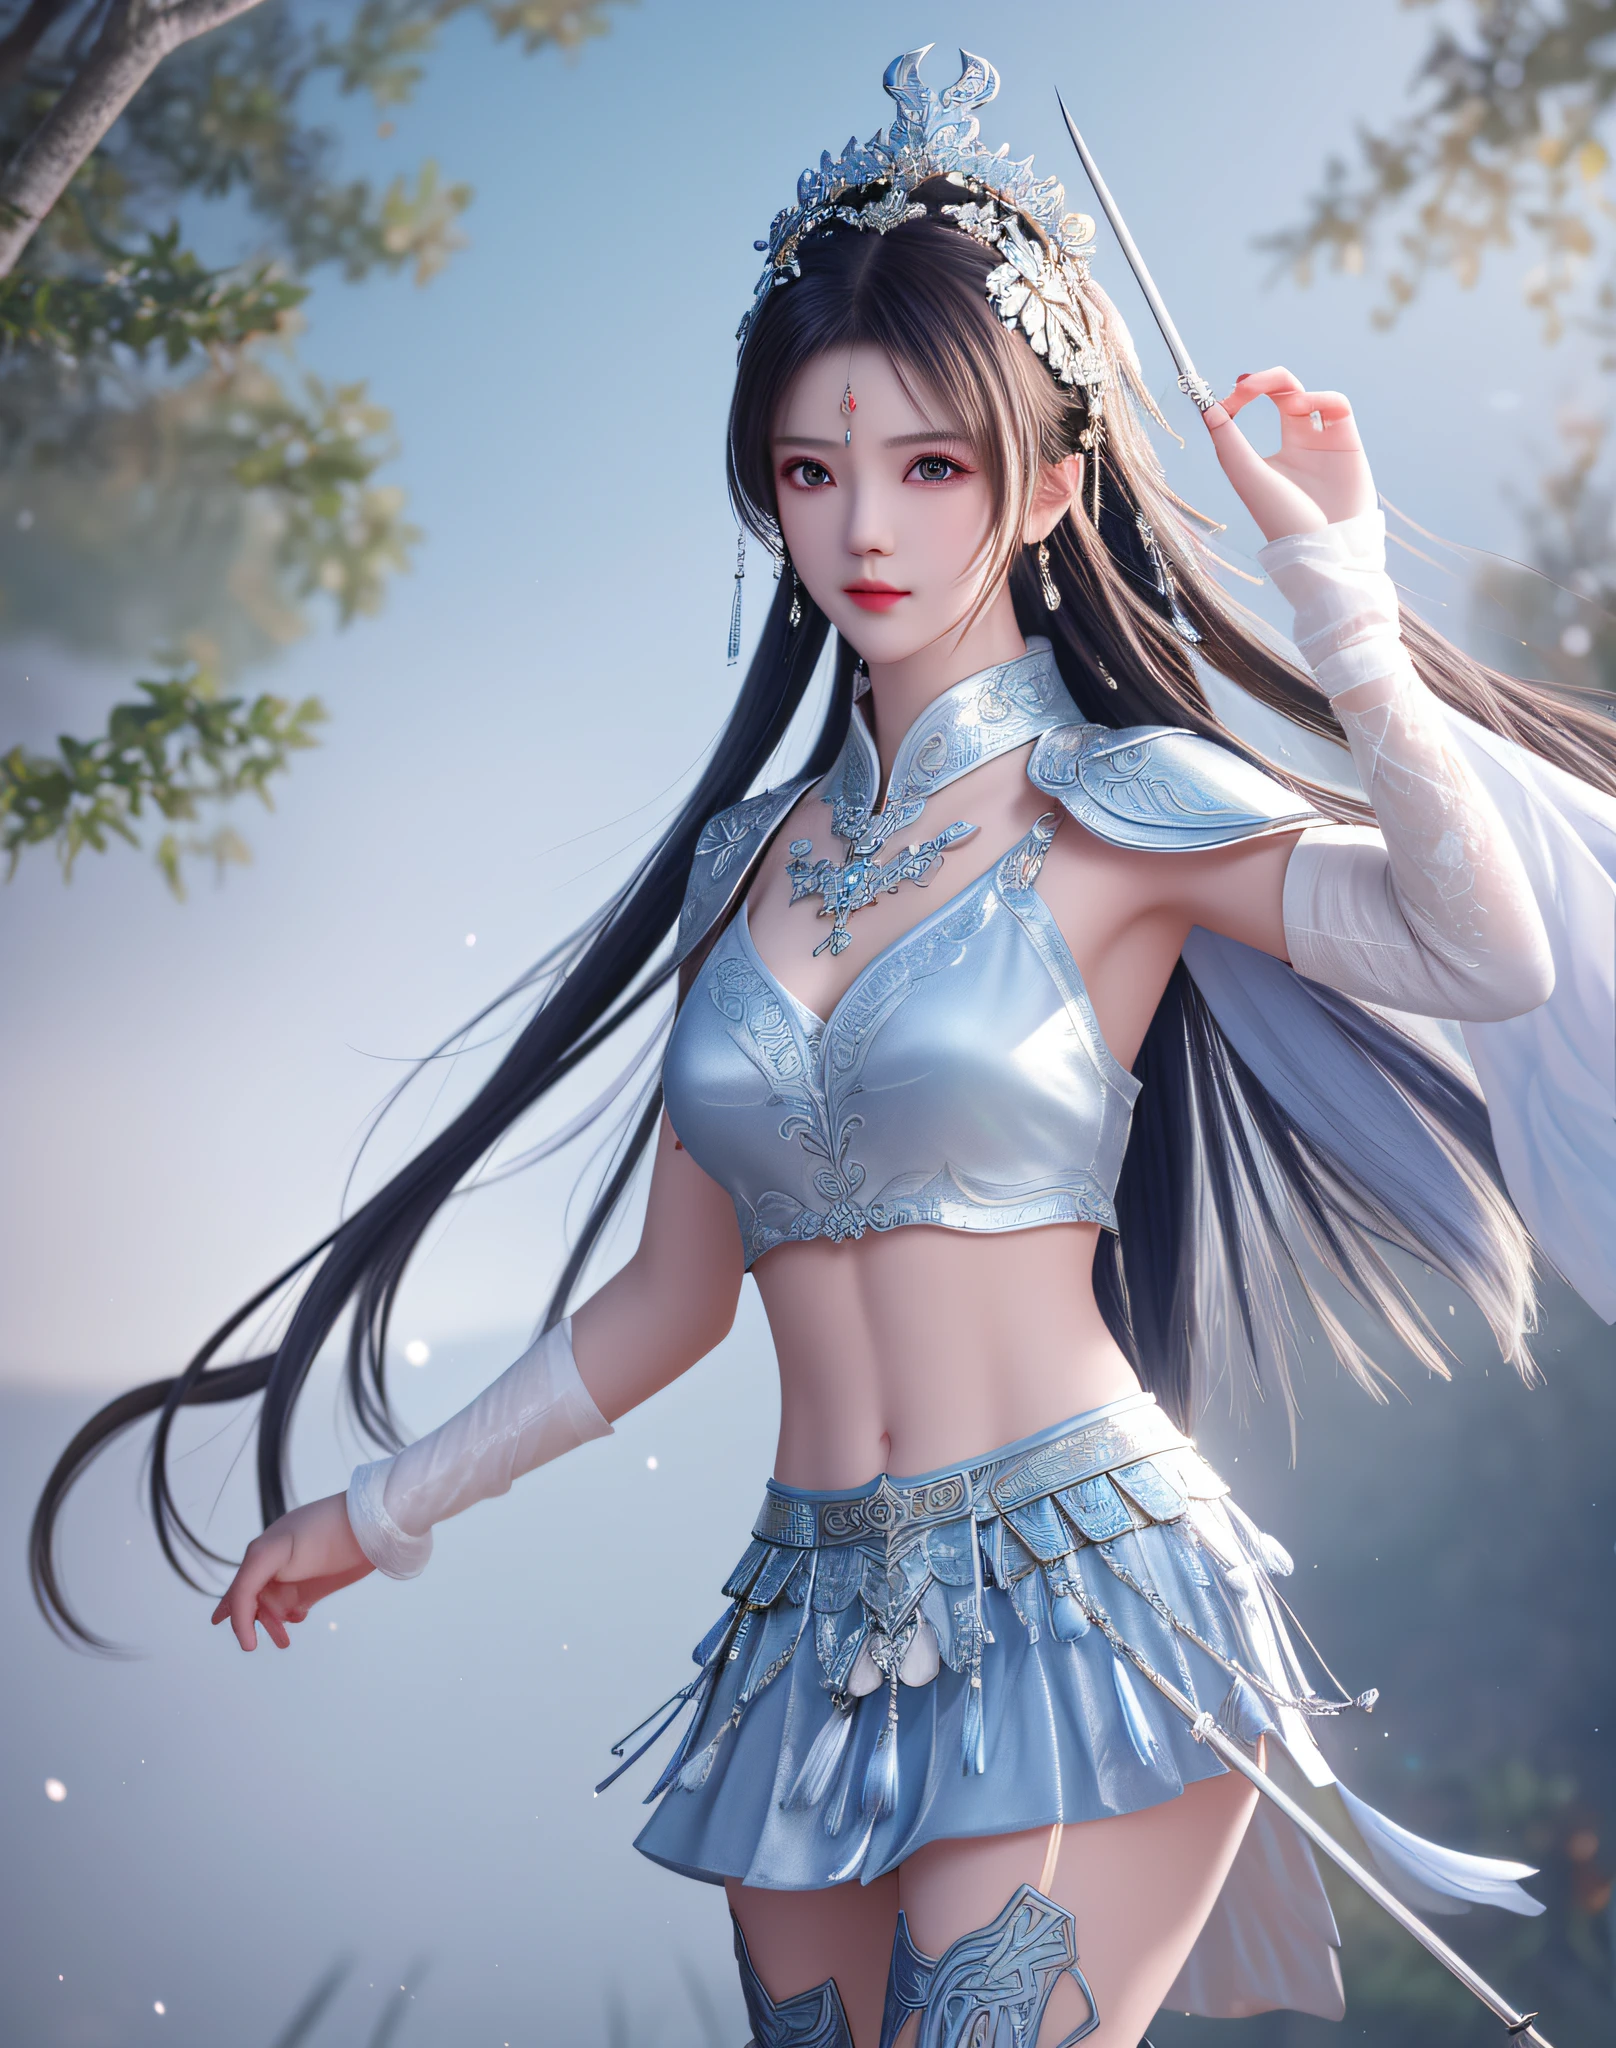 best quality, masterpiece, high resolution, 1girl, ancient chinese battlefield background, metal armor, cape, metal collar, ancient spear, silver spear, hair ornament, necklace, jewelry, beautiful face, upon_body, tyndall effect, realistic, dark studio, edge lighting, duotone lighting, (high detail skin:1.2), 8k ultra hd, dslr camera, soft lighting, high quality, volumetric lighting, candid, photos, high resolution, 4k, 8k, bokeh, Silver-white bikini armor, ancient metal spear, chest embroidery, metal cuirass, skinny, bare arms, weapons, short bracers, stockings, parry